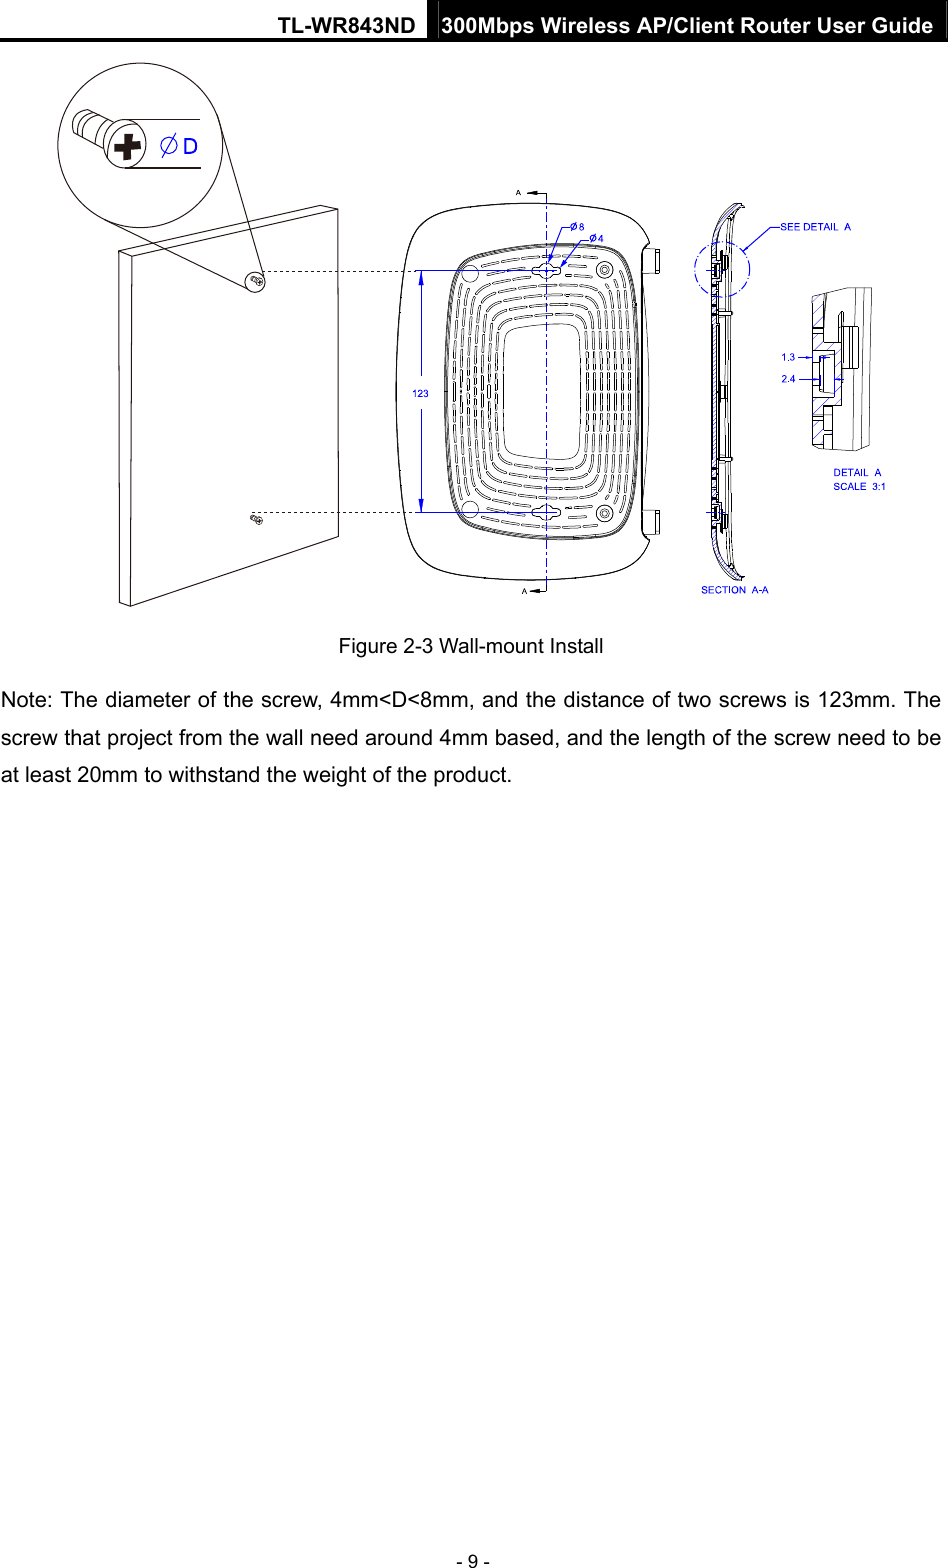 TL-WR843ND 300Mbps Wireless AP/Client Router User Guide - 9 -  Figure 2-3 Wall-mount Install Note: The diameter of the screw, 4mm&lt;D&lt;8mm, and the distance of two screws is 123mm. The screw that project from the wall need around 4mm based, and the length of the screw need to be at least 20mm to withstand the weight of the product. 